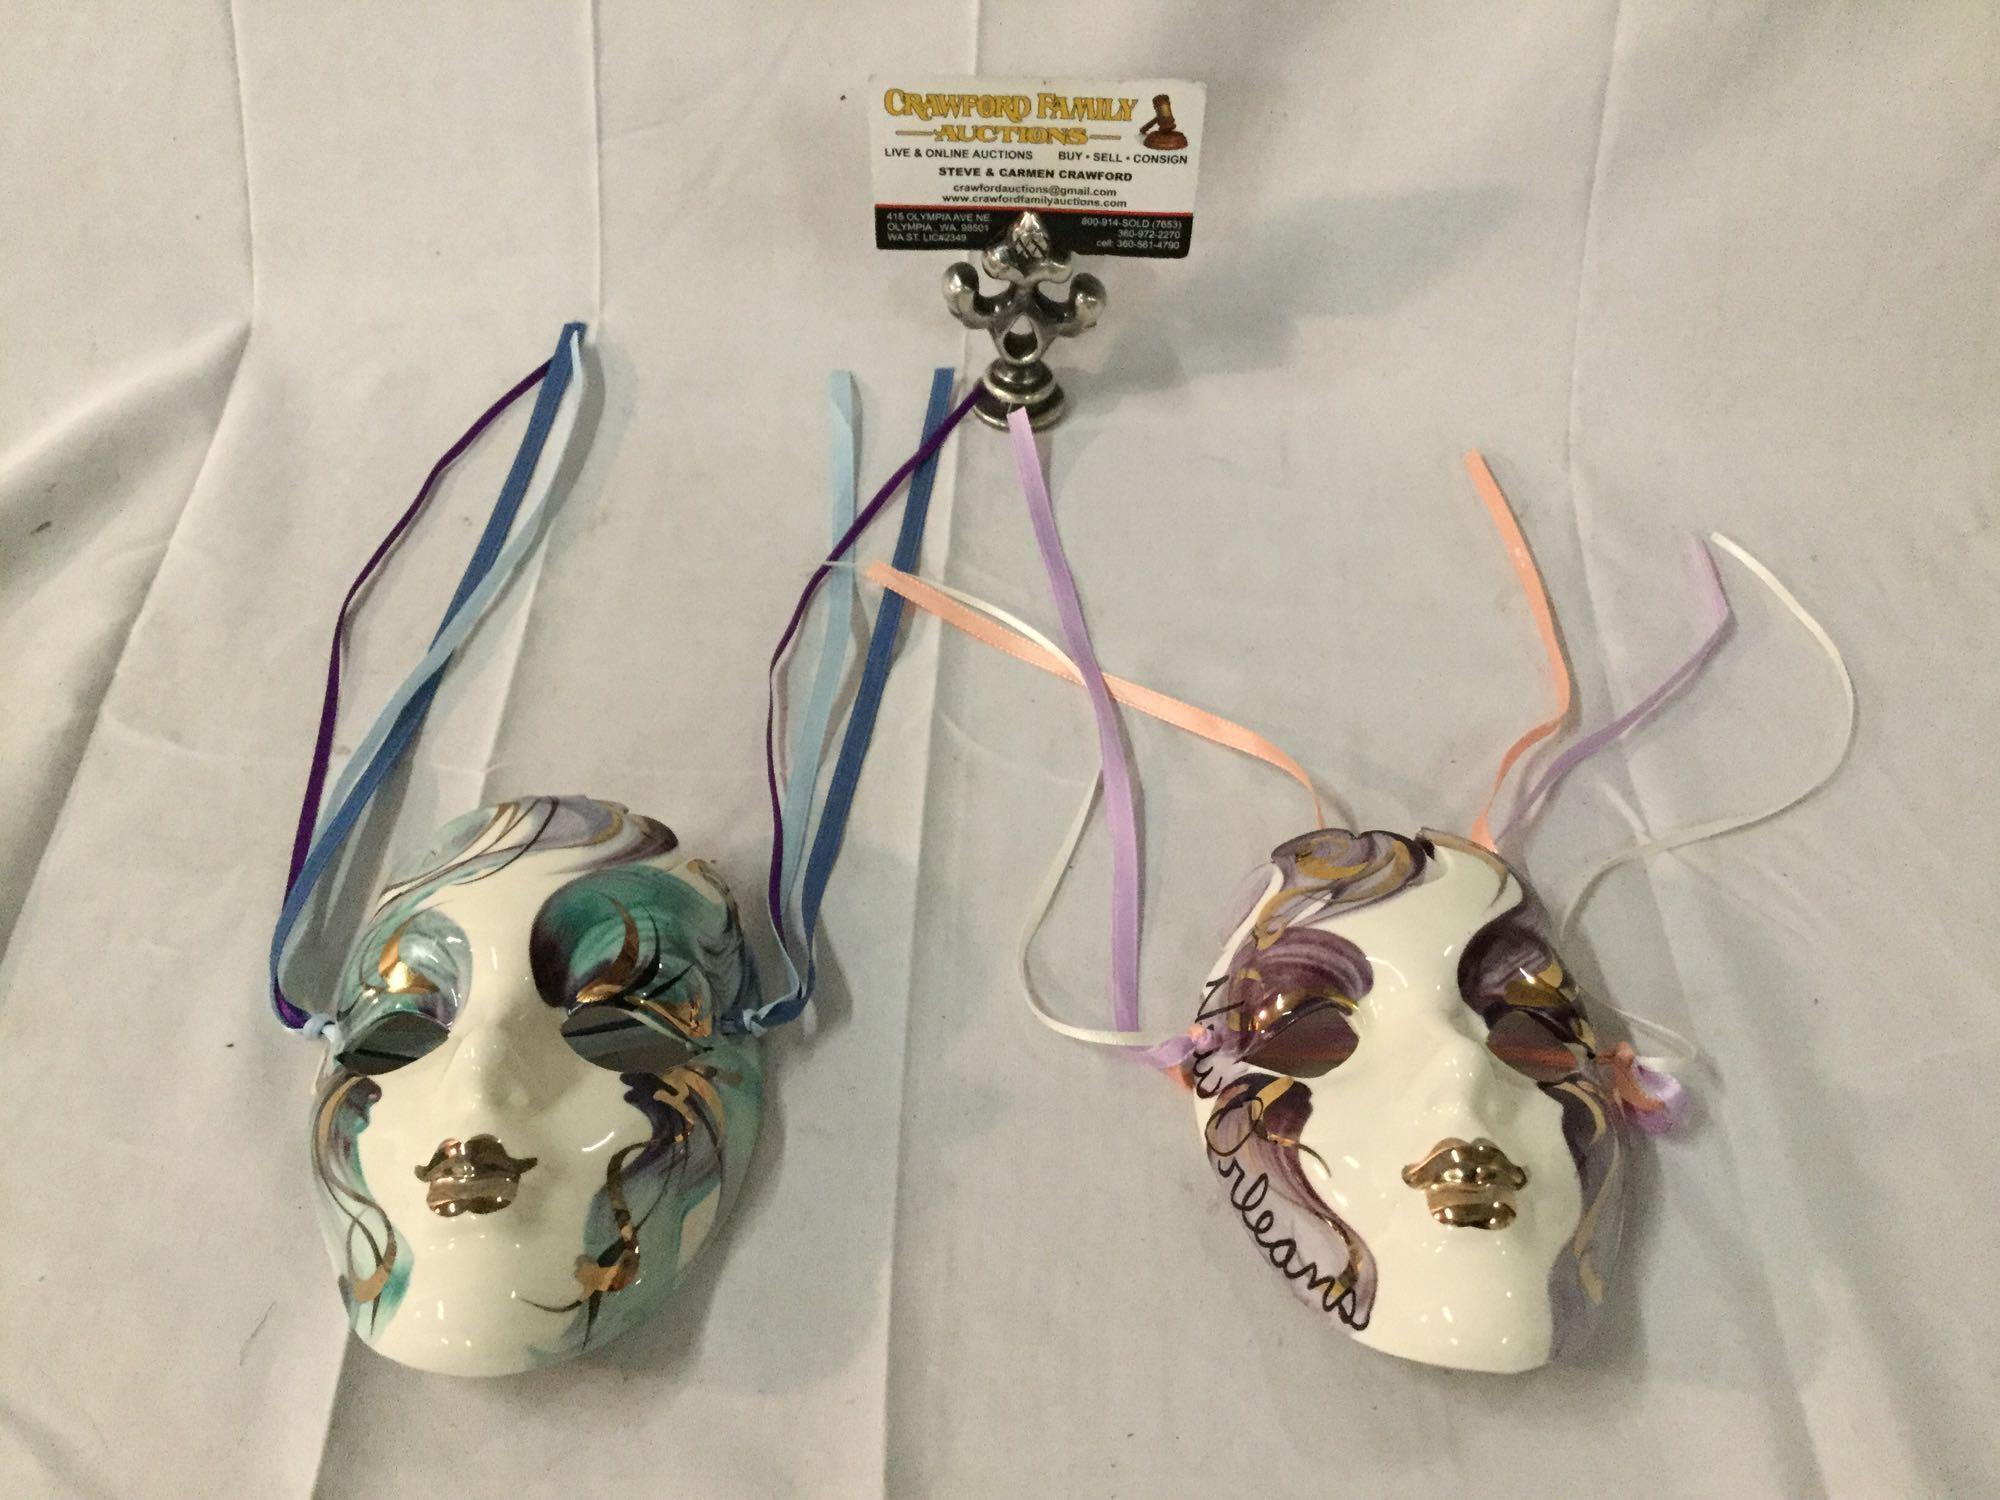 Pair of New Orleans hand painted porcelain masks with ribbons - signed by the artist as is